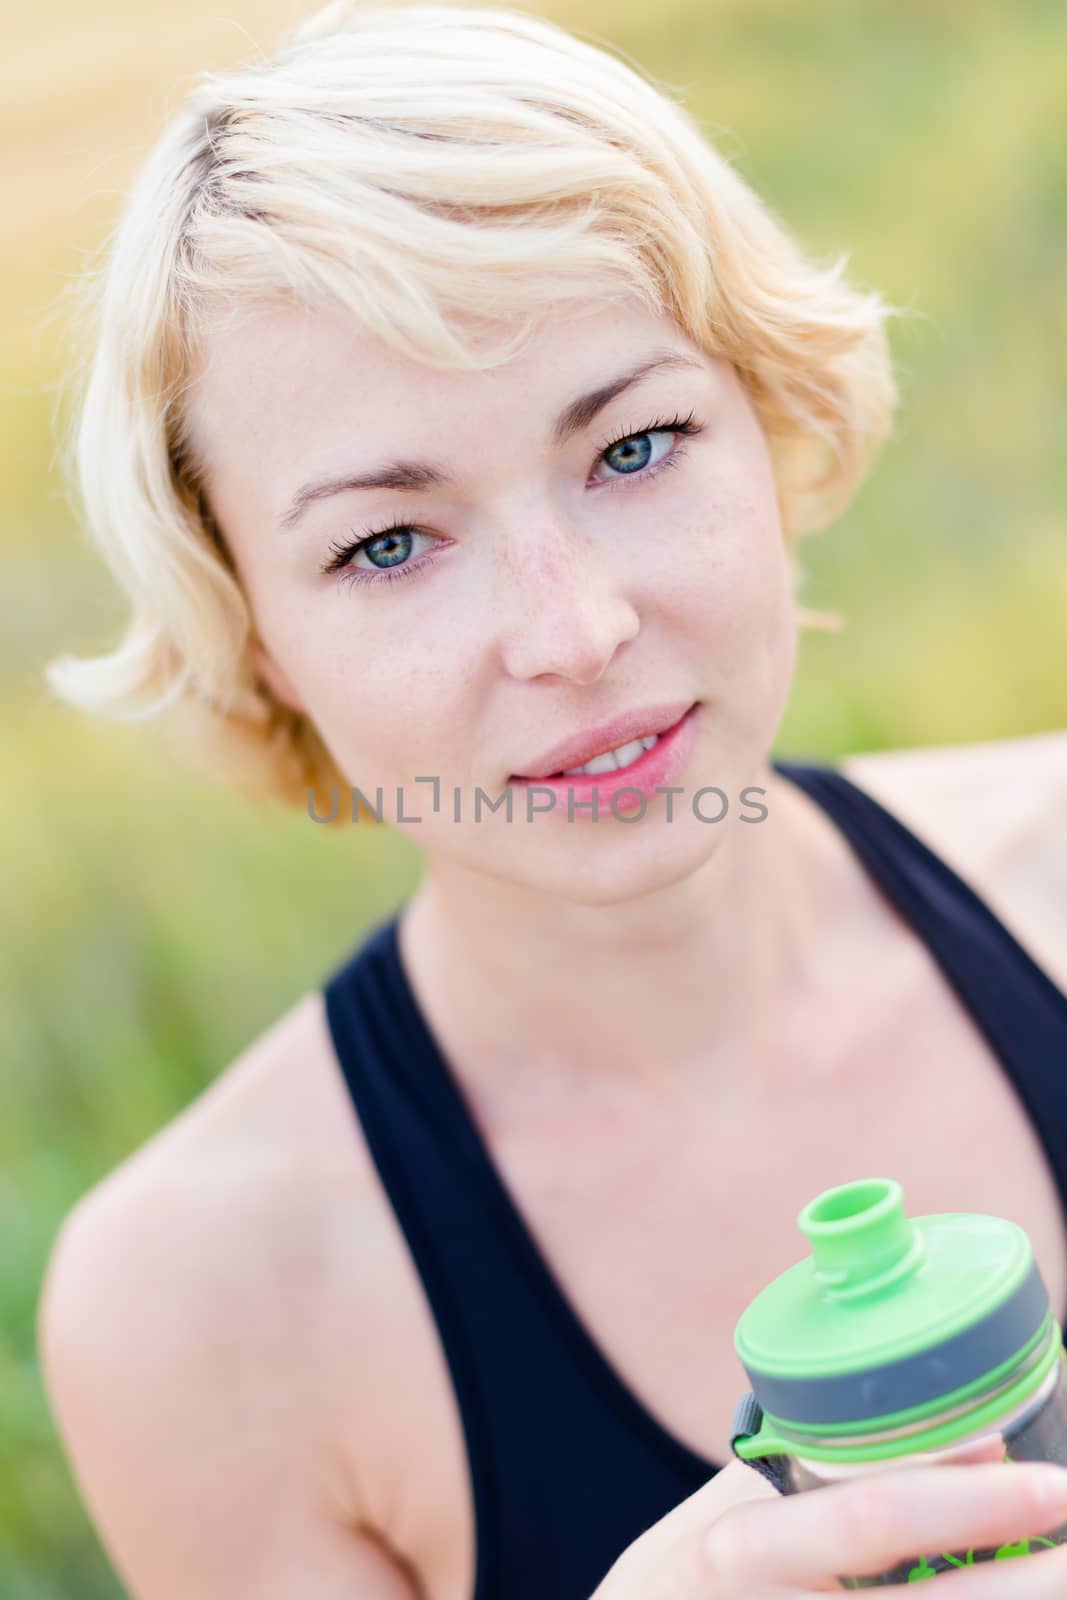 Lady holding a water bottle, hydrating during outdoor activities.